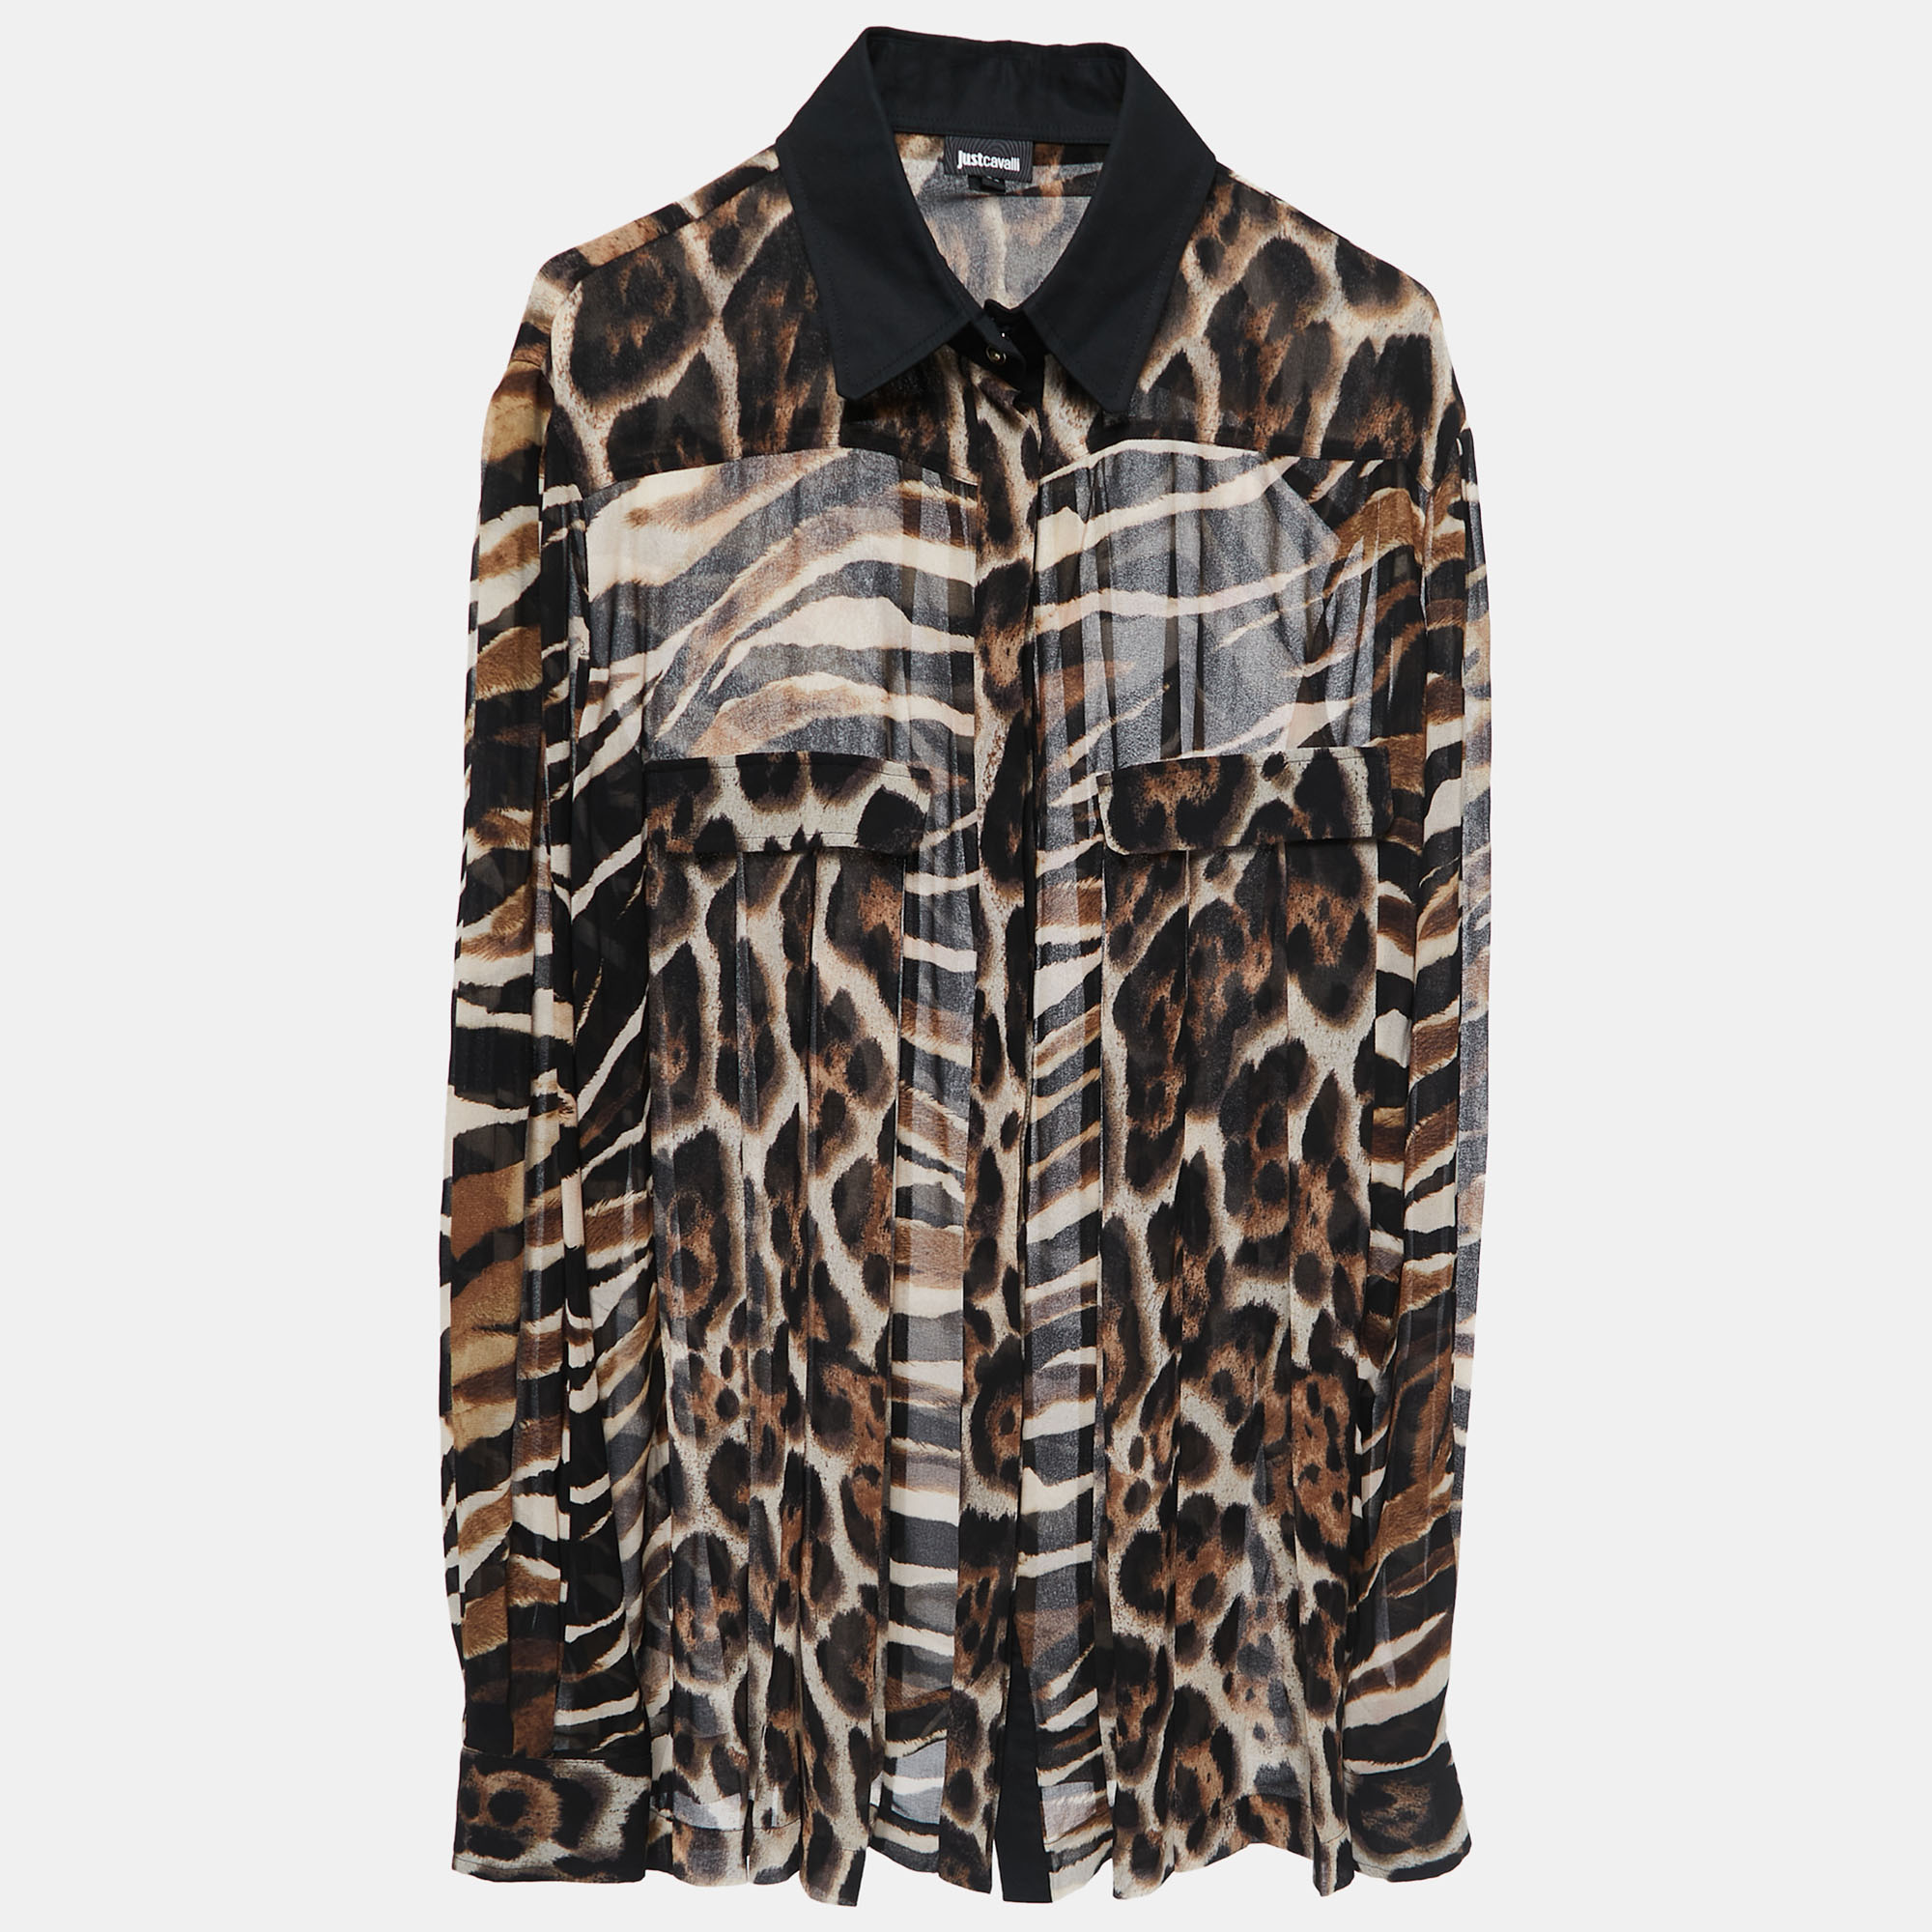 Just Cavalli Black Animal Print Synthetic Button Front Full Sleeve Shirt Blouse XL